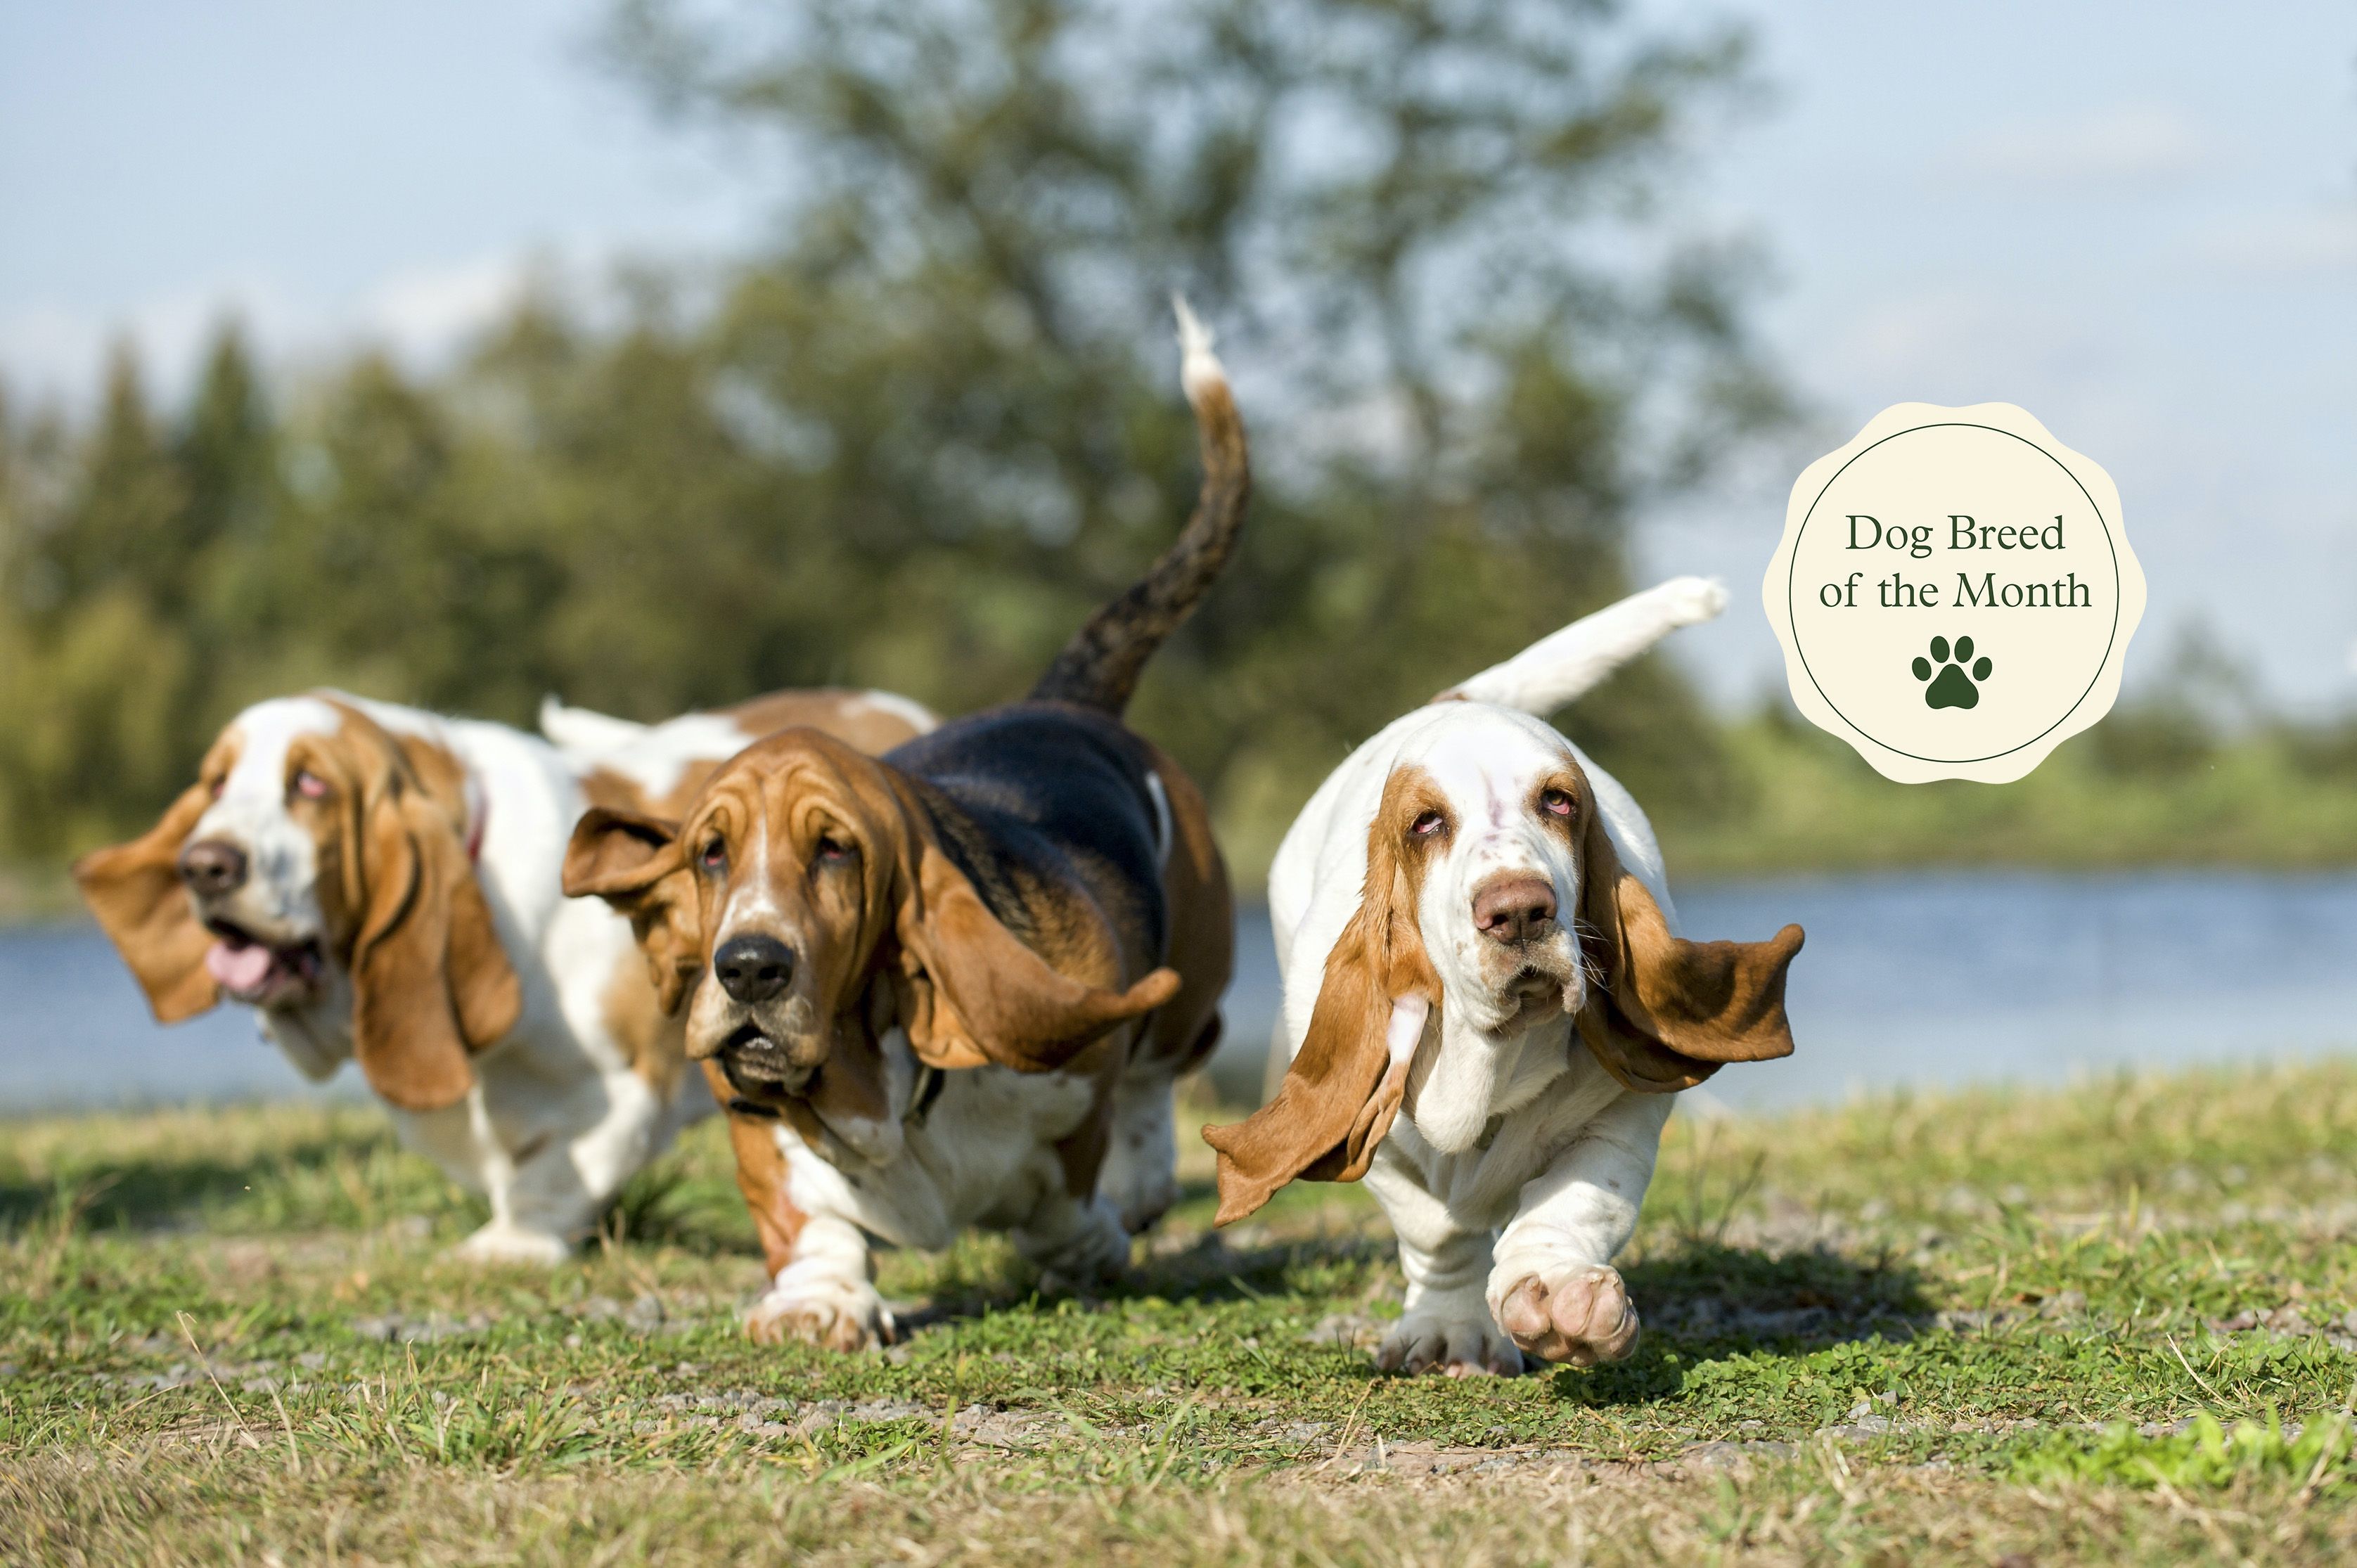 are male or female basset hounds better